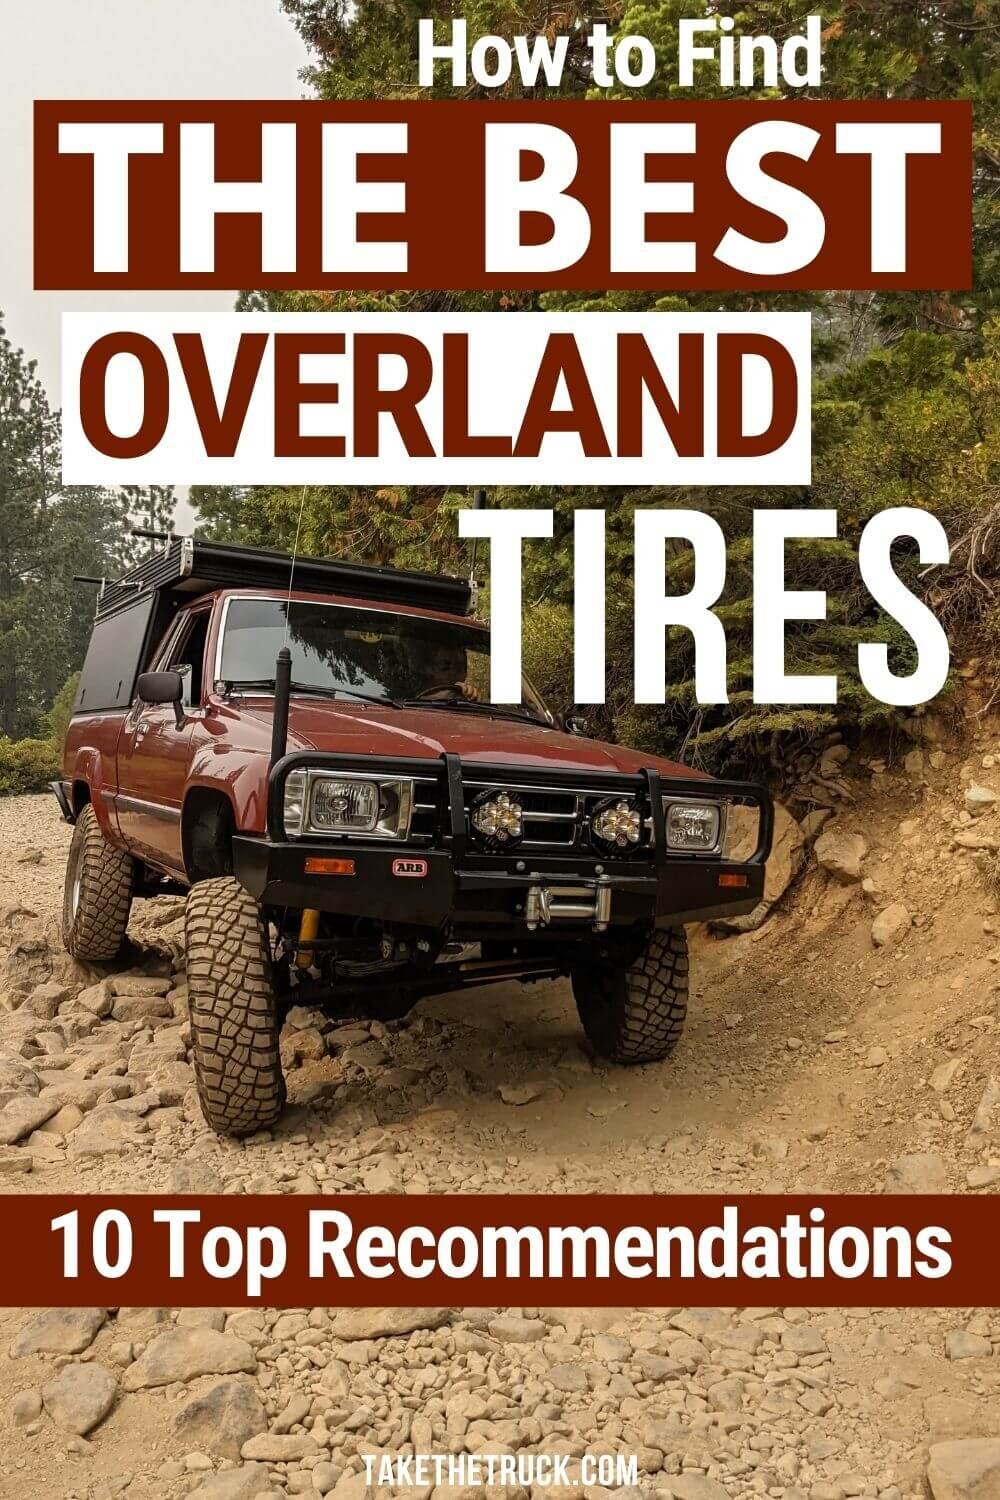 Find off road tires or overlanding tires for your overlanding vehicle. Know how to choose between all terrain truck tires, hybrid tires, or mud terrain tires - plus 10 specific overlanding tires!